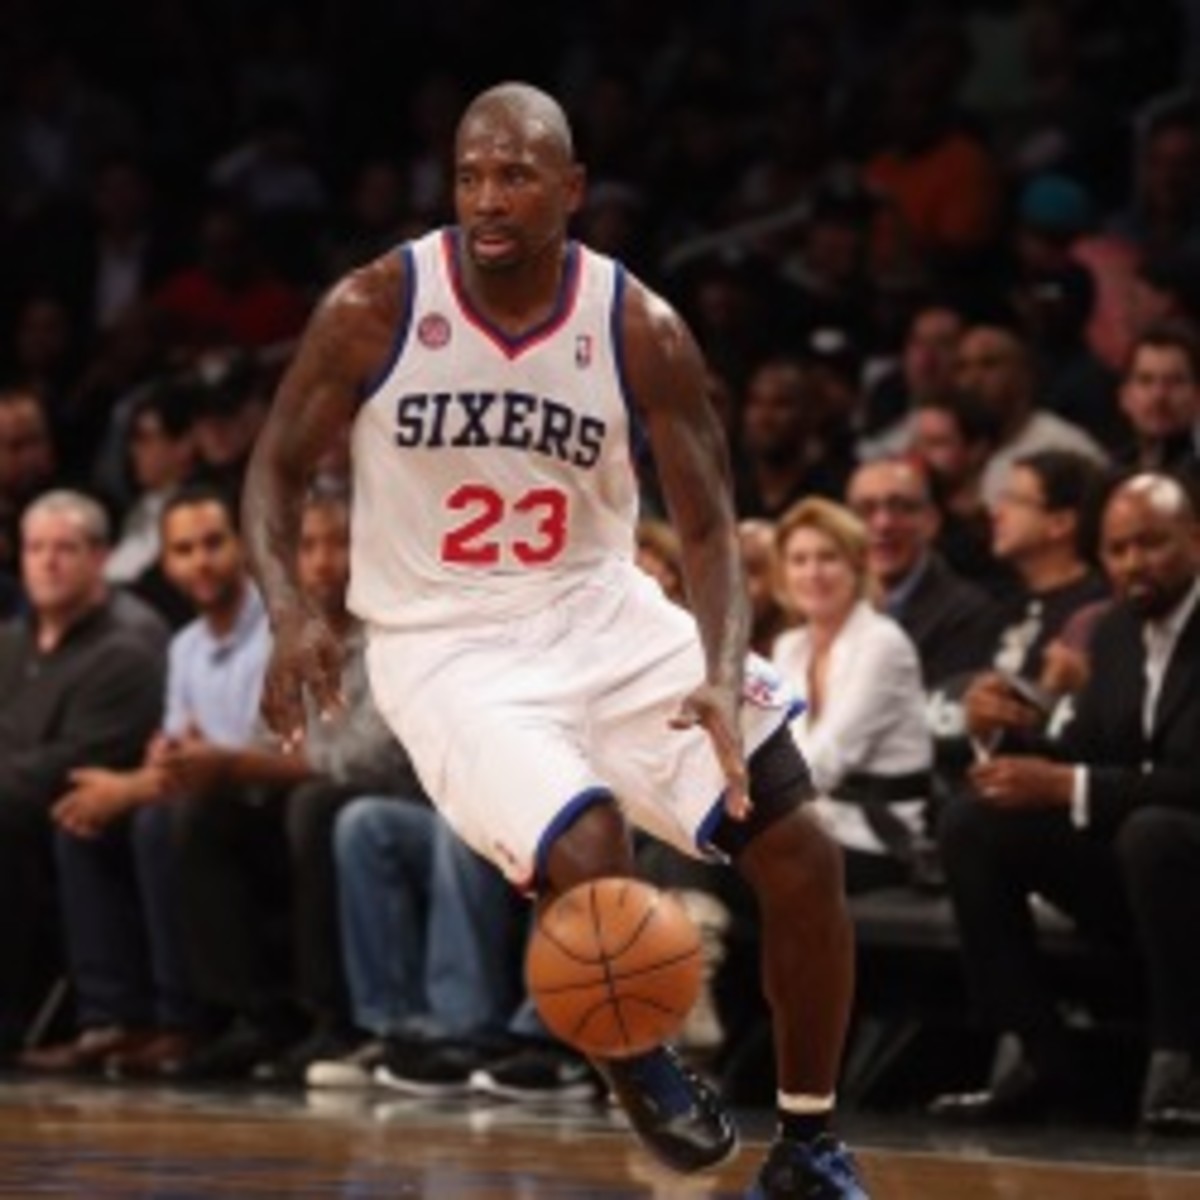 Sixers guard Jason Richardson will miss the rest of the season because of a knee injury. (Bruce Bennett/Getty Images)